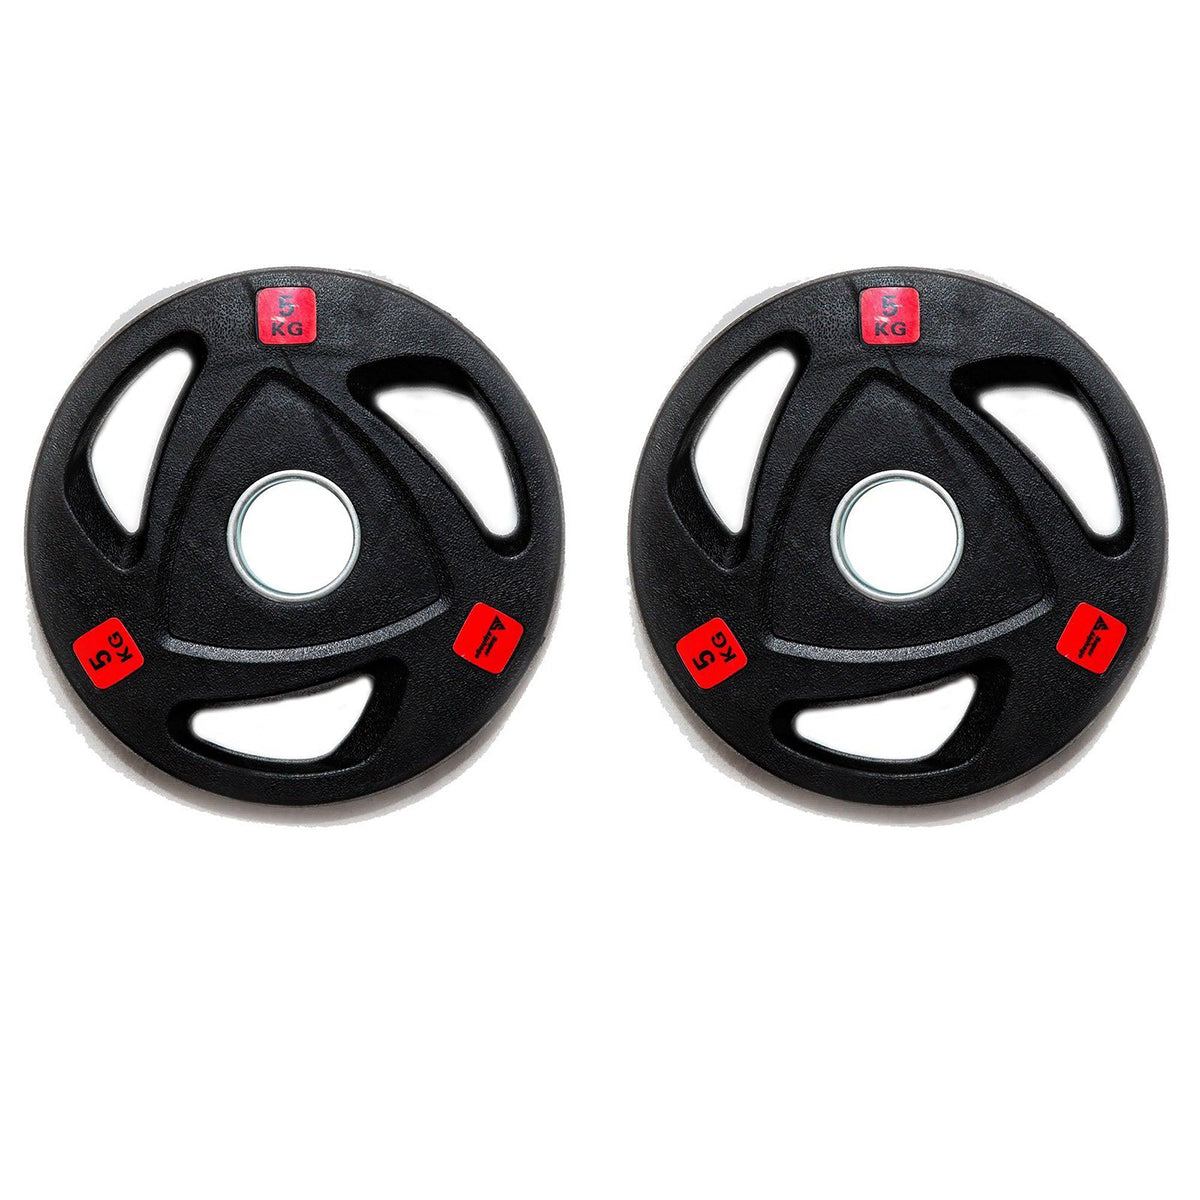 pair of 5kg Olympic Tri-Grip Rubber Coated Weight Platespair of 2.5kg Olympic Tri-Grip Rubber Coated Weight Plates